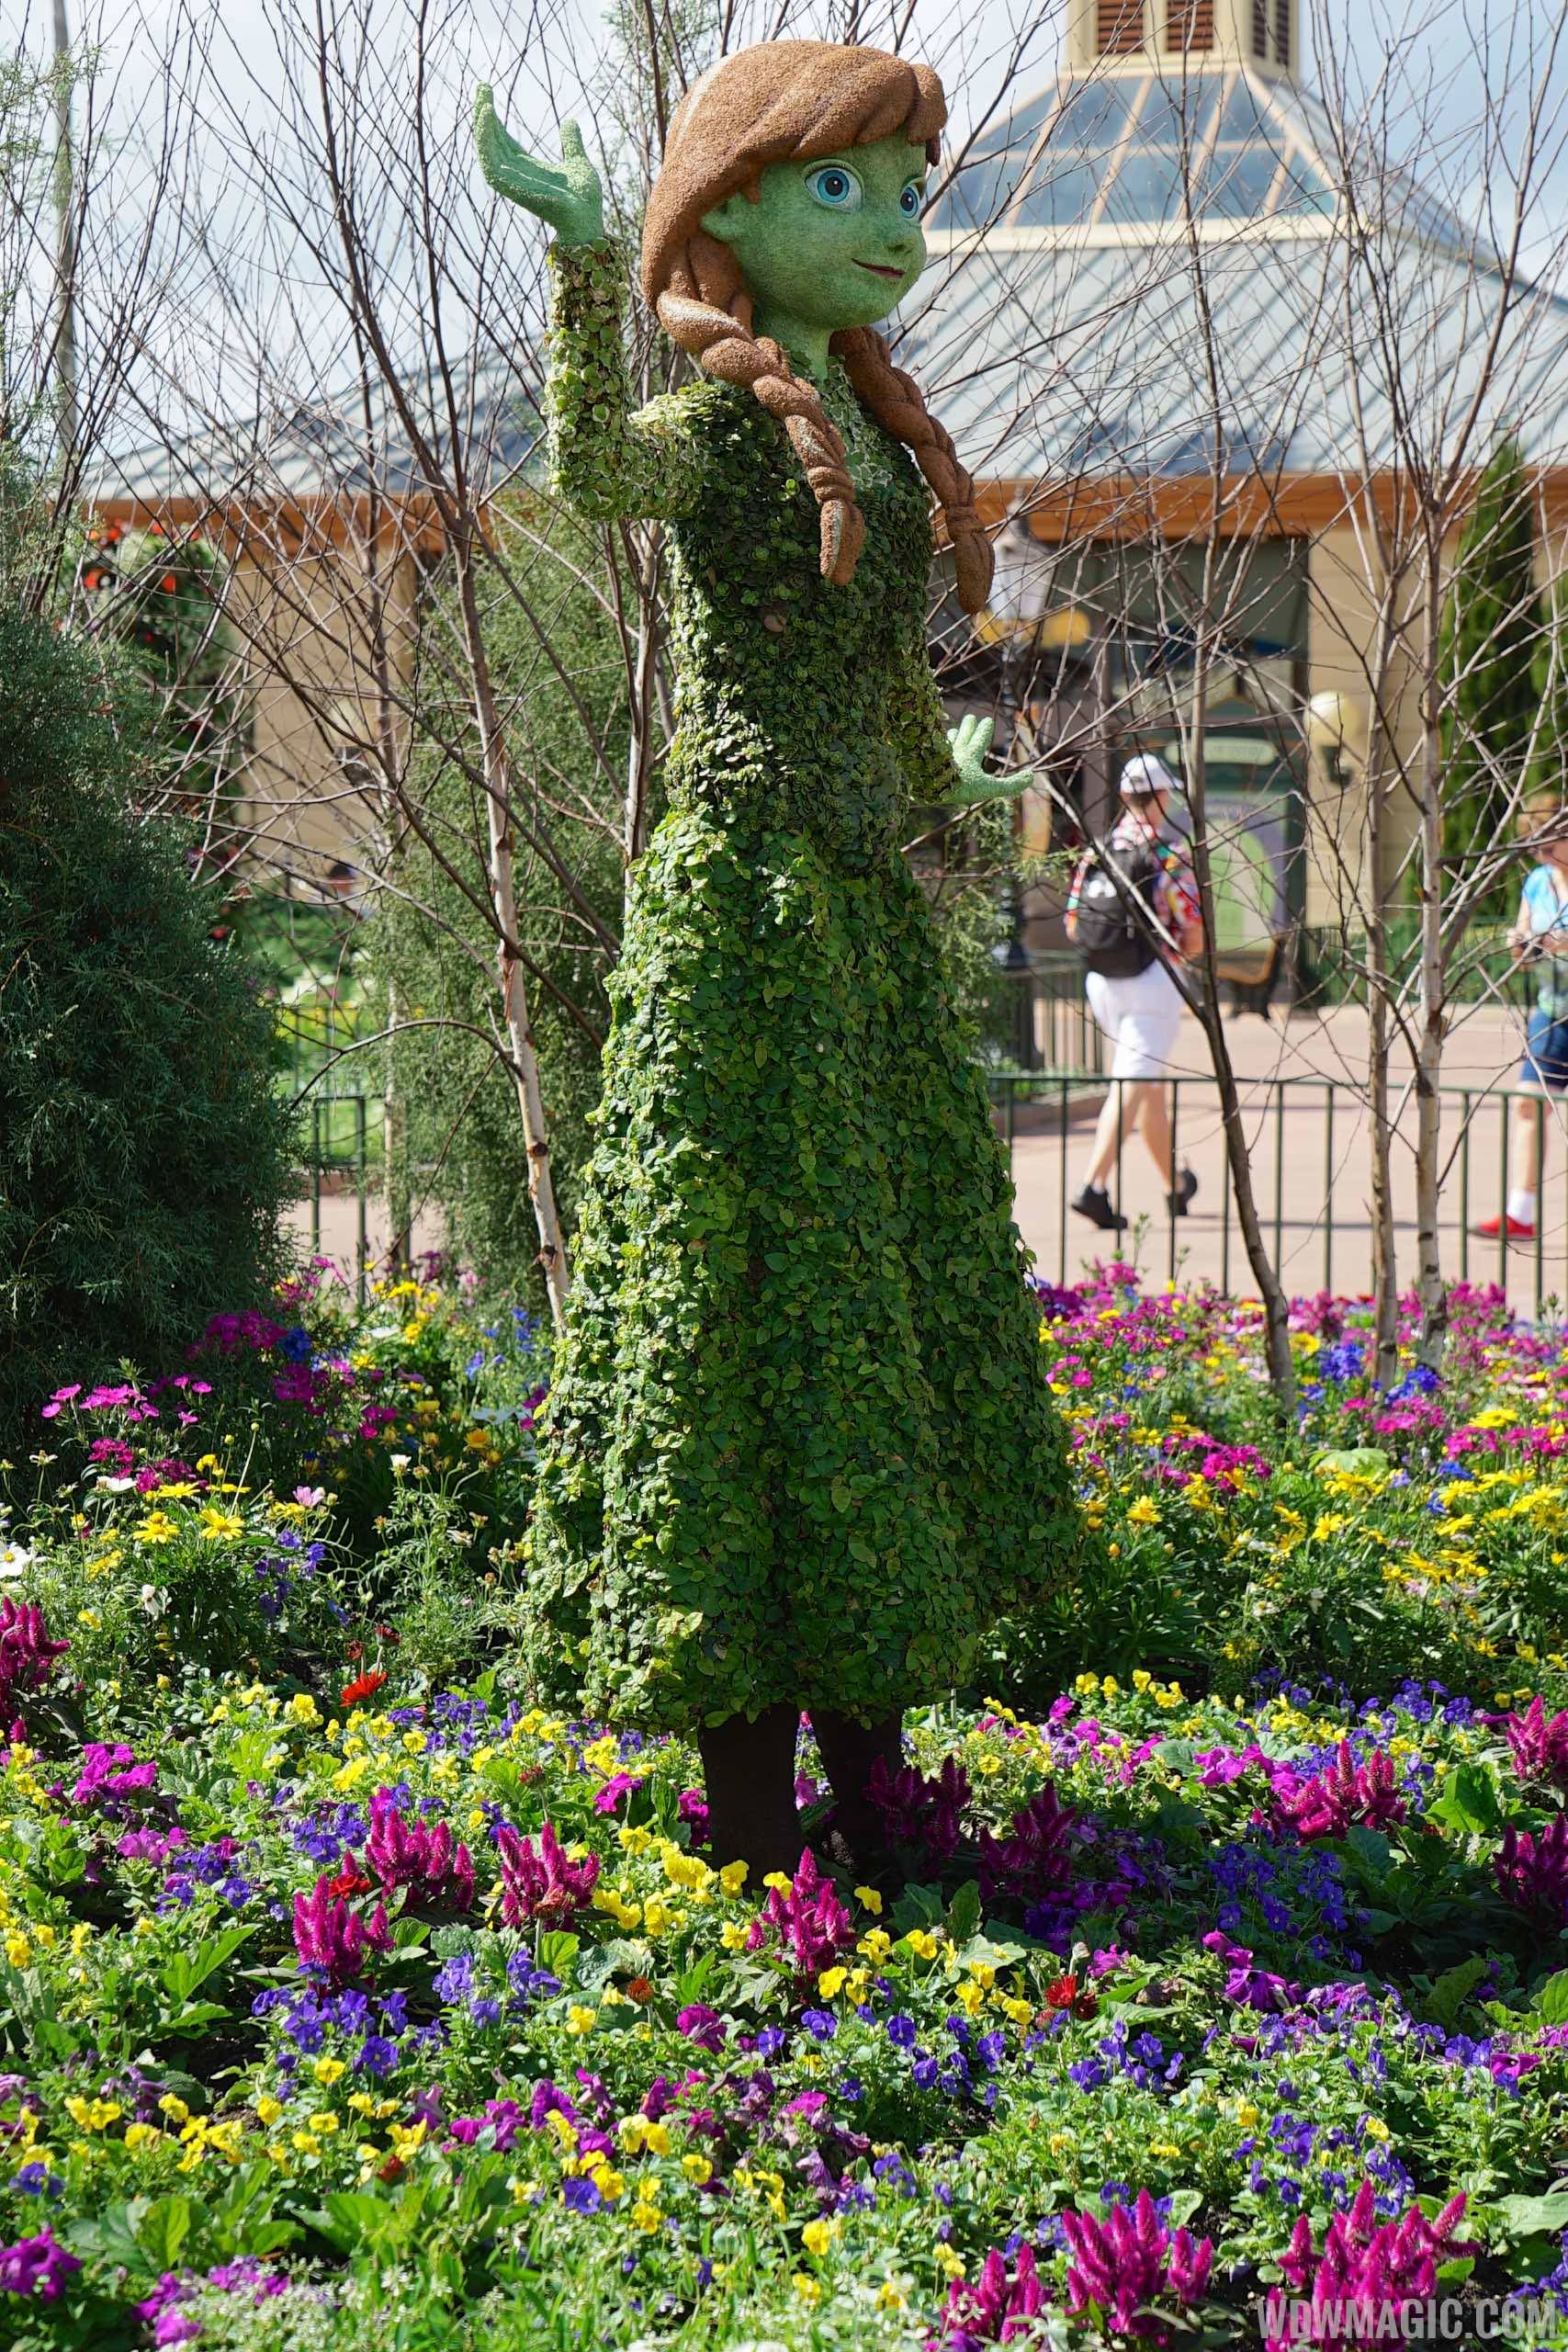 2015 Epcot Flower and Garden Festival - Anna topiary